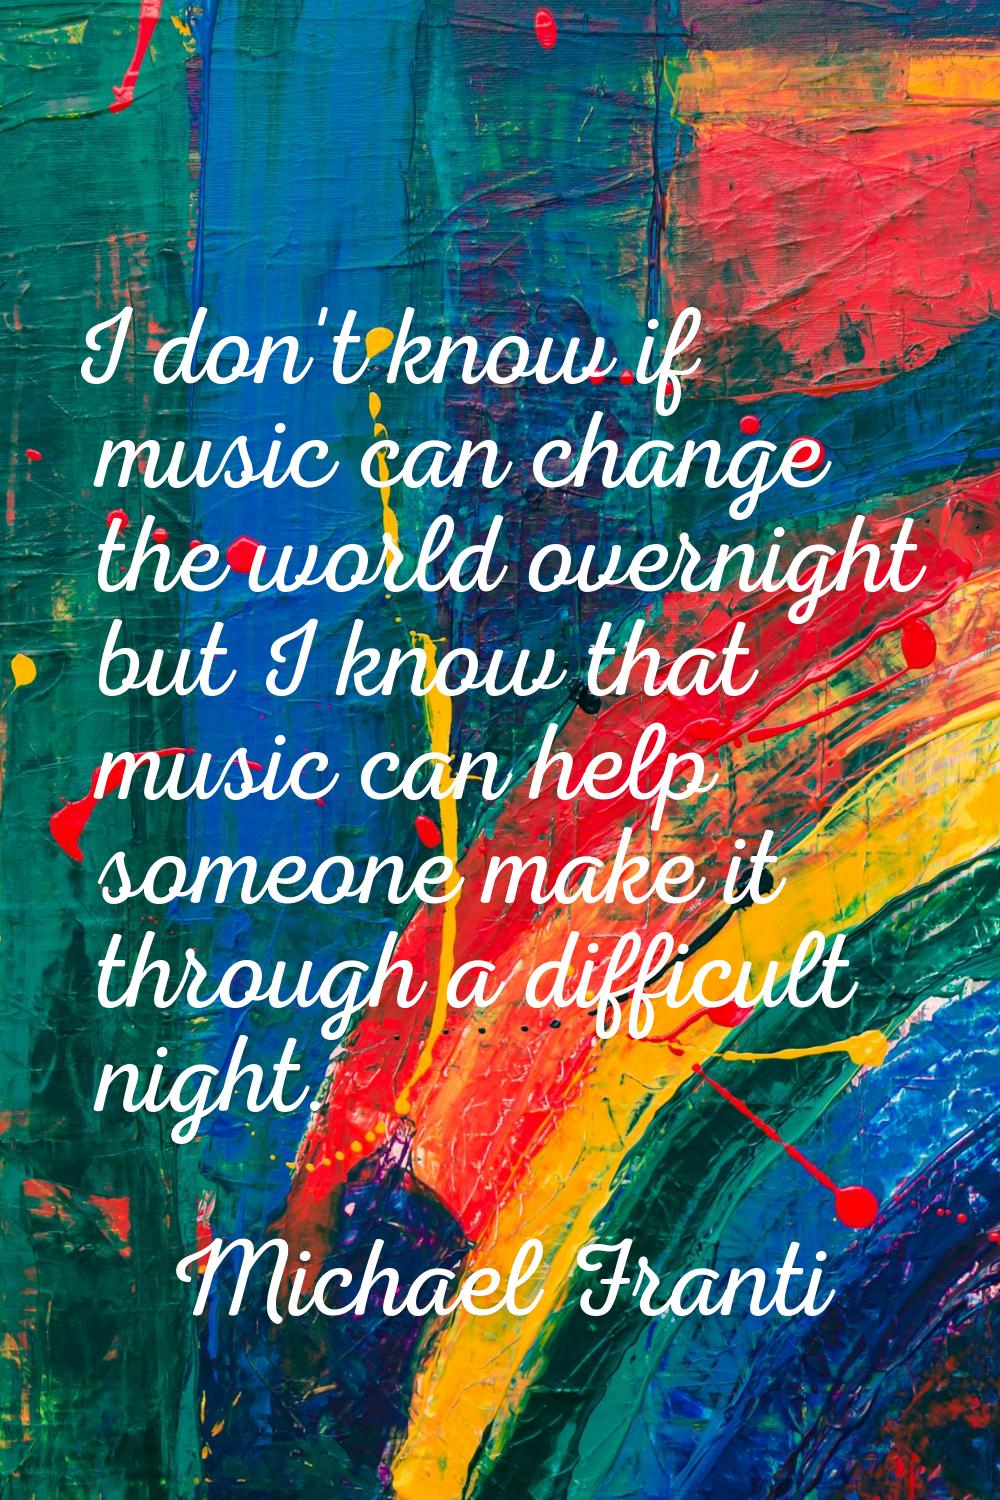 I don't know if music can change the world overnight but I know that music can help someone make it